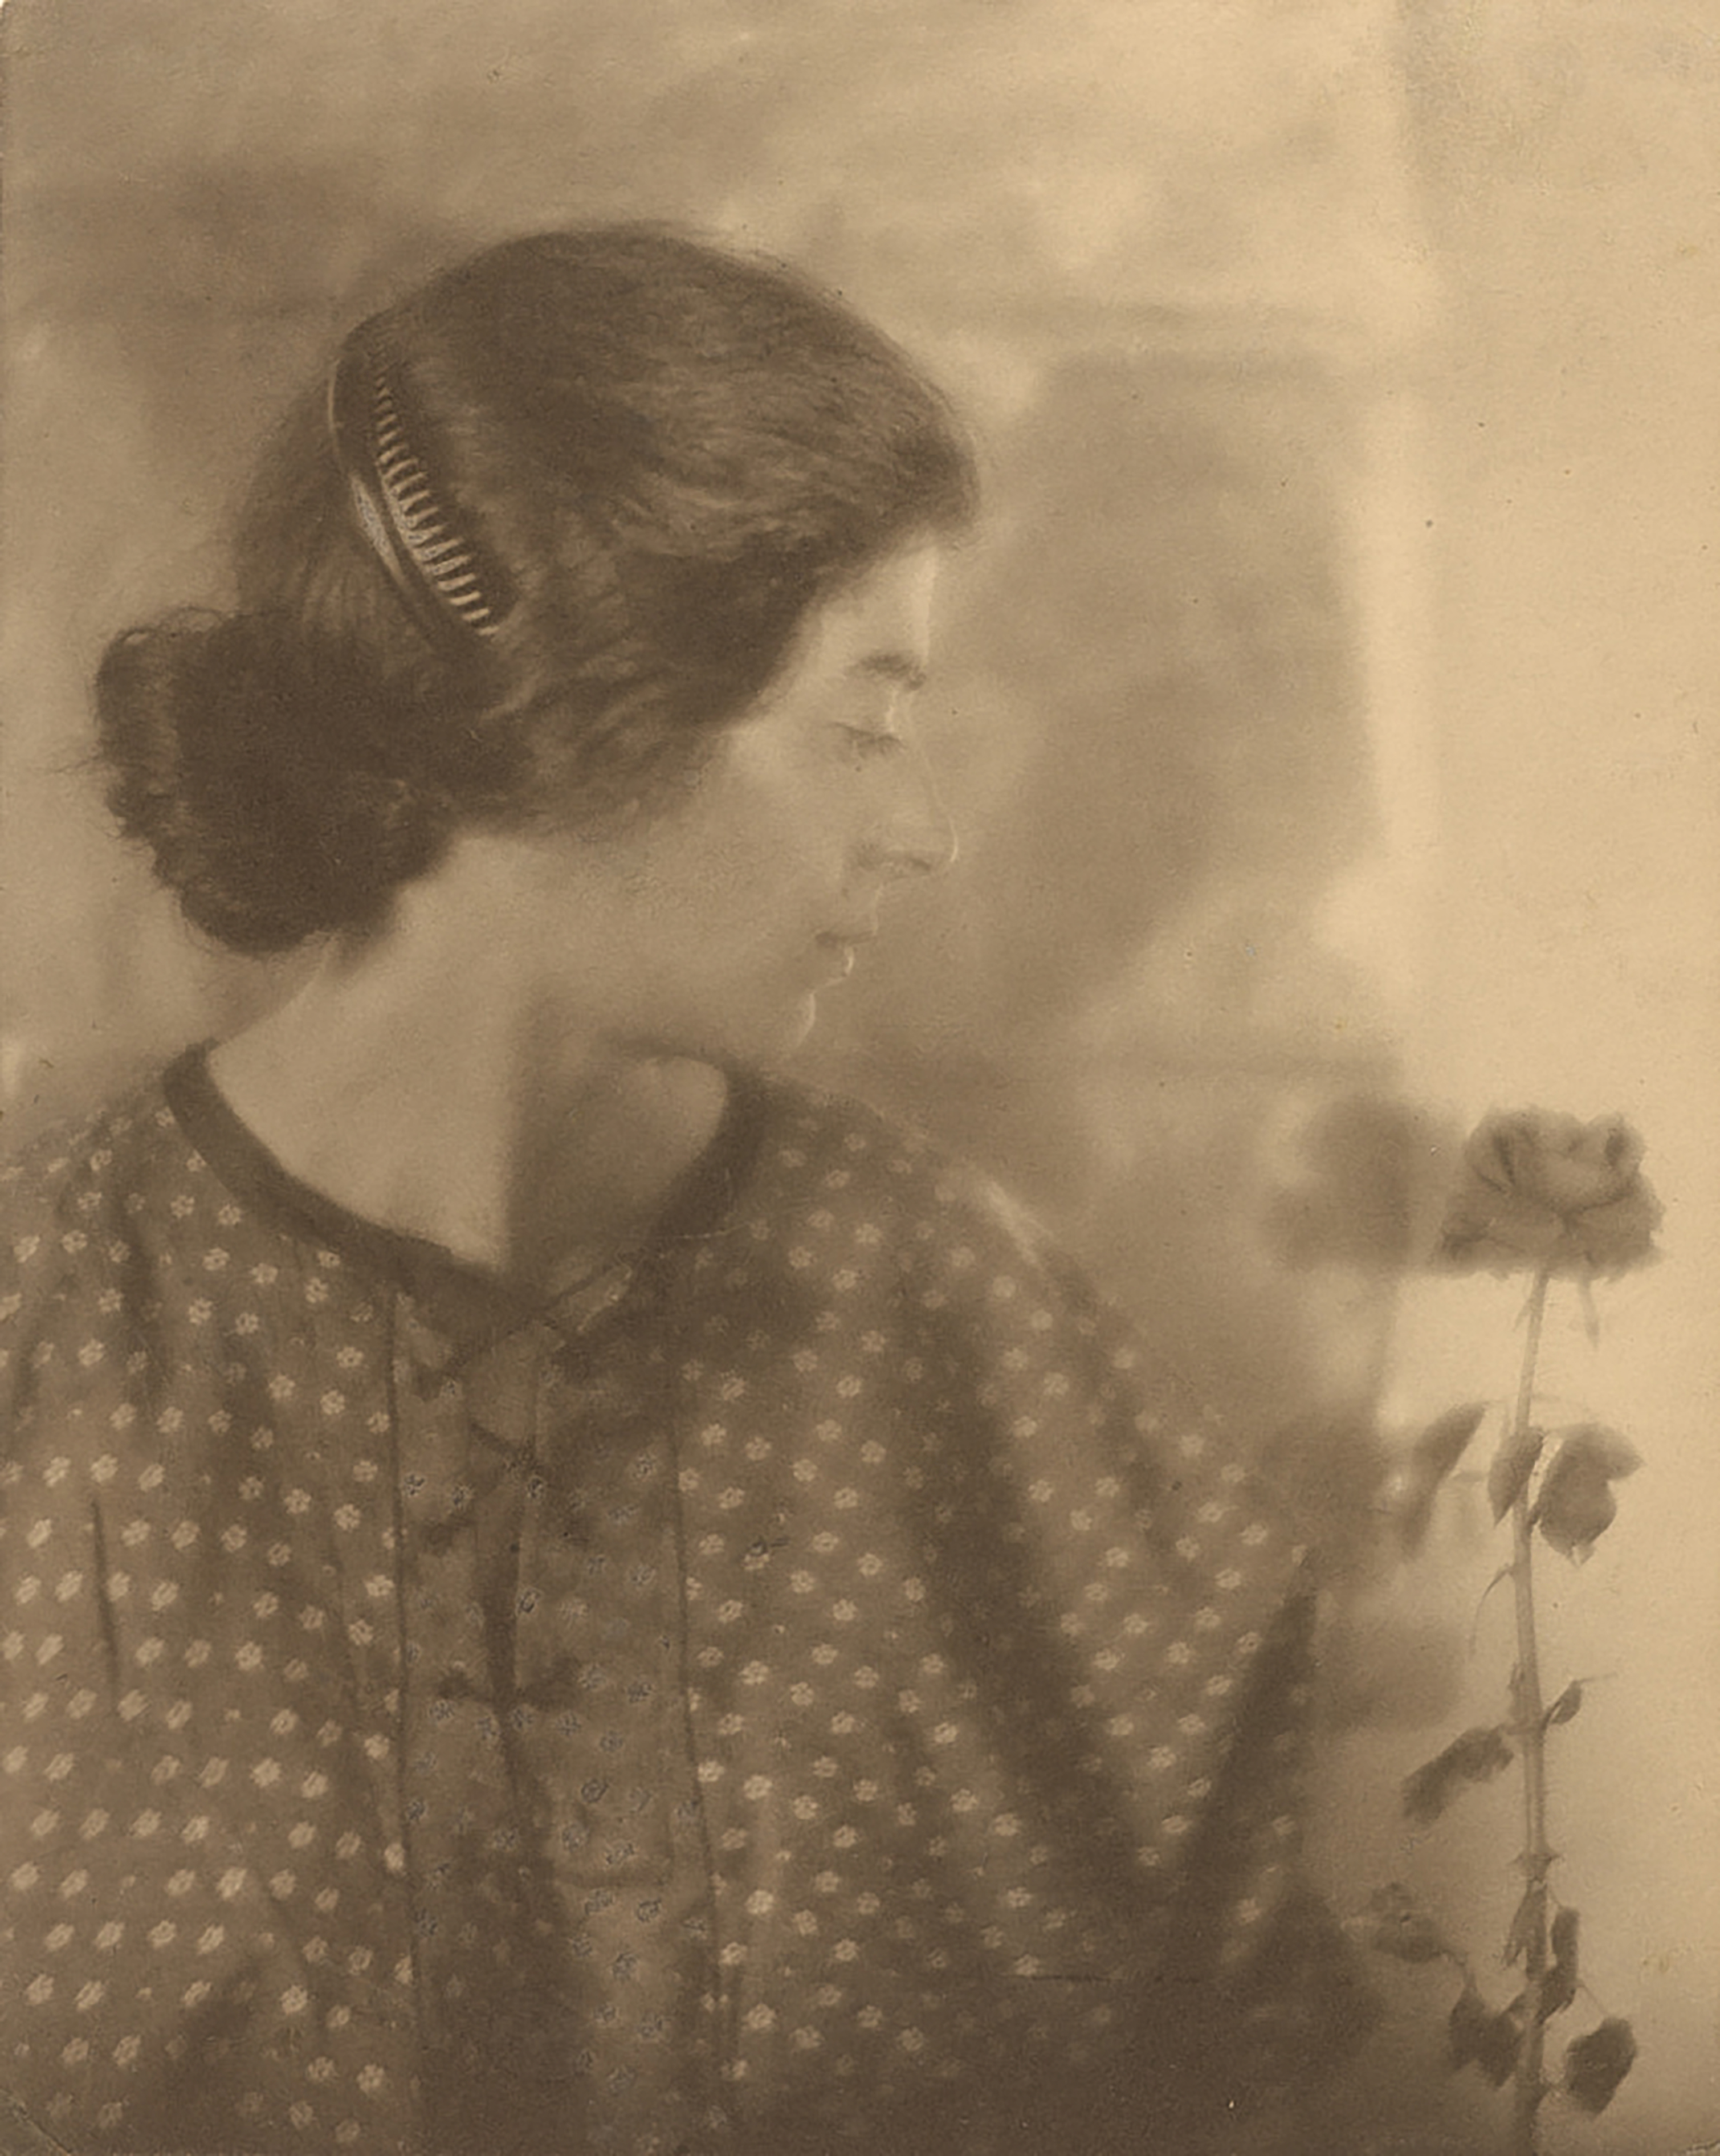 Margrethe Mather (1885 - 1952) :: Betty Katz, Los Angeles, about 1916. Side profile of a woman wearing a hair comb and floral pattern shirt. There is a single rose beside her. Palladium print. | src The J. Paul Getty Museum